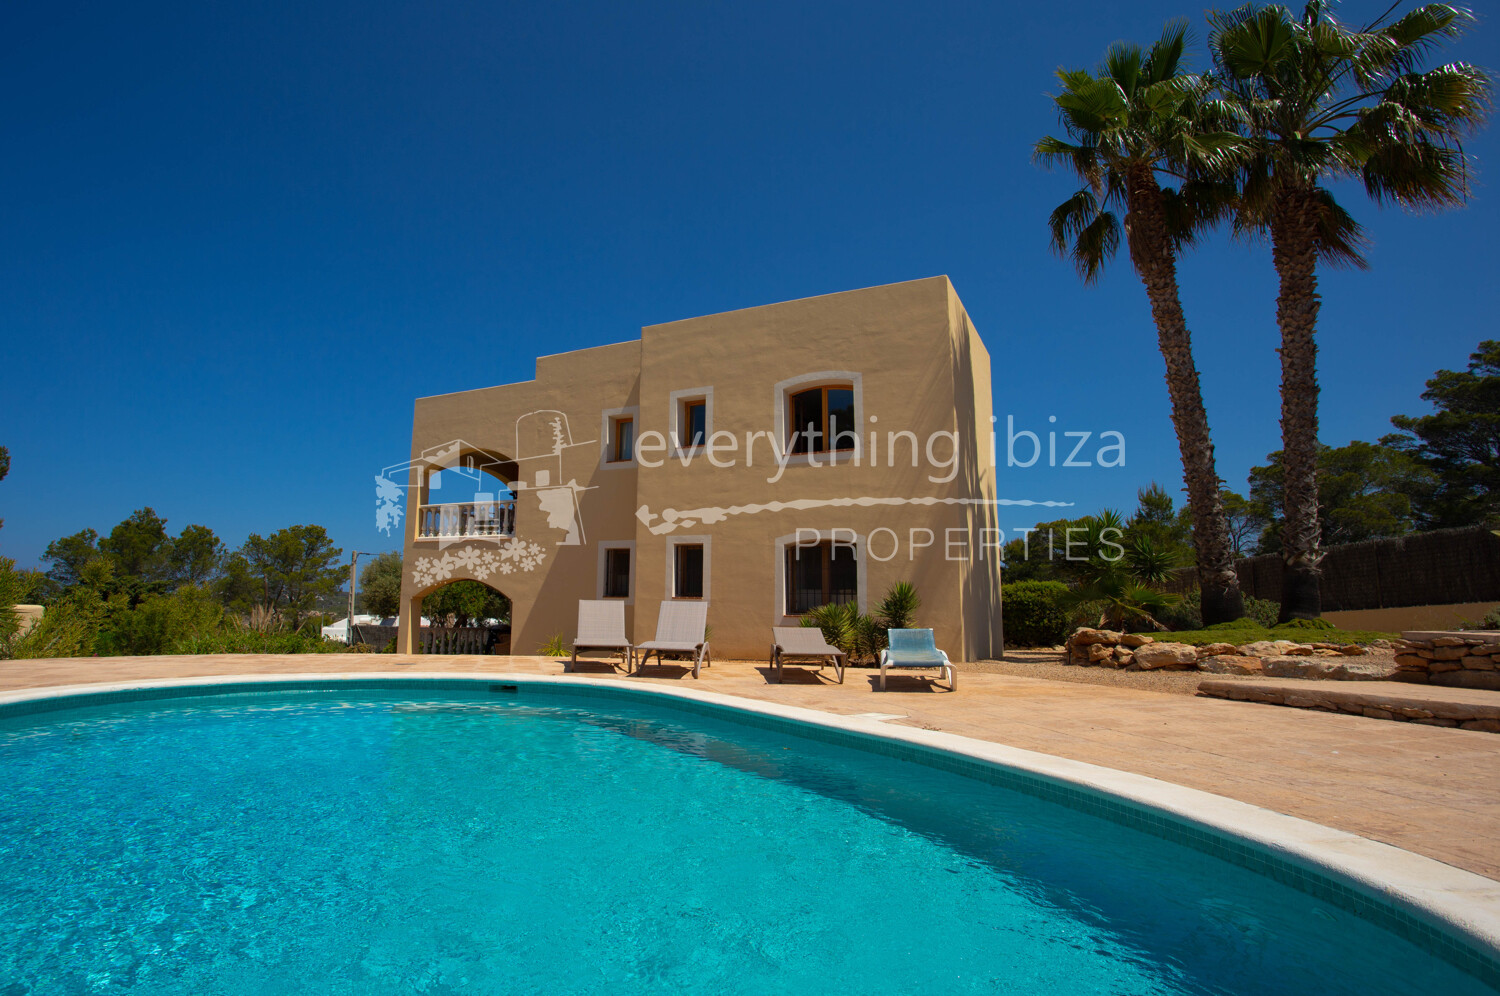 Two Hillside Villas with Swimming Pool, Sea and Sunset Views, ref. 1644, for sale in Ibiza by everything ibiza Properties